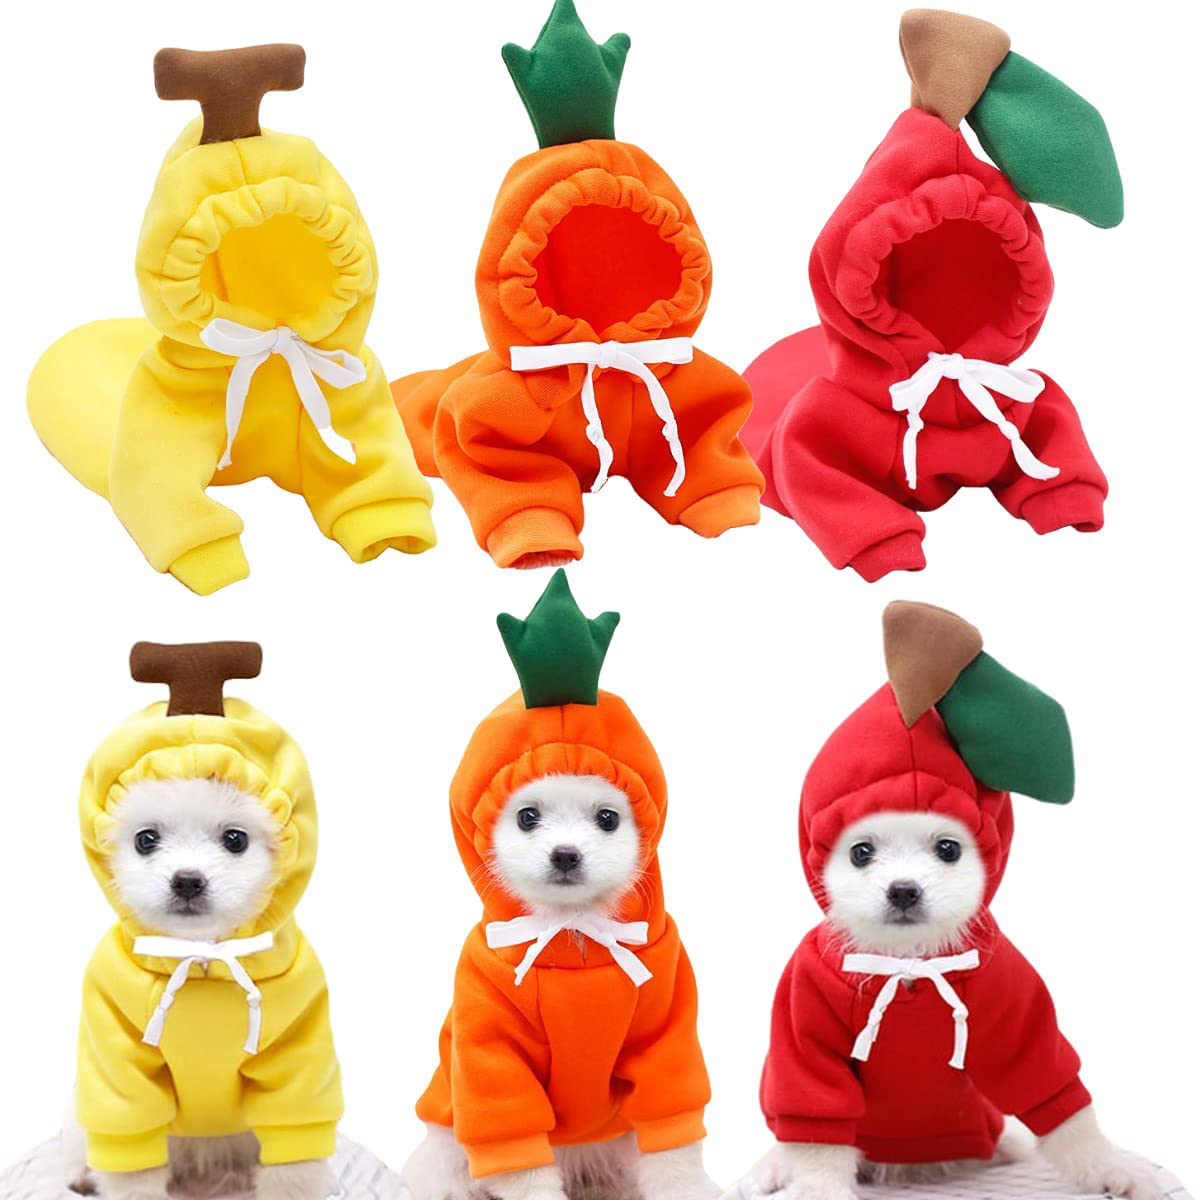 Dog Hoodie Sweatshirts Puppy Sweaters for Small Dogs Boy Girl for 1Lb To17.6Lb Dogs - Winter Fall Dog Clothes for Chihuahua Doggie Pet Cat Warm Fleece Coat Outfit